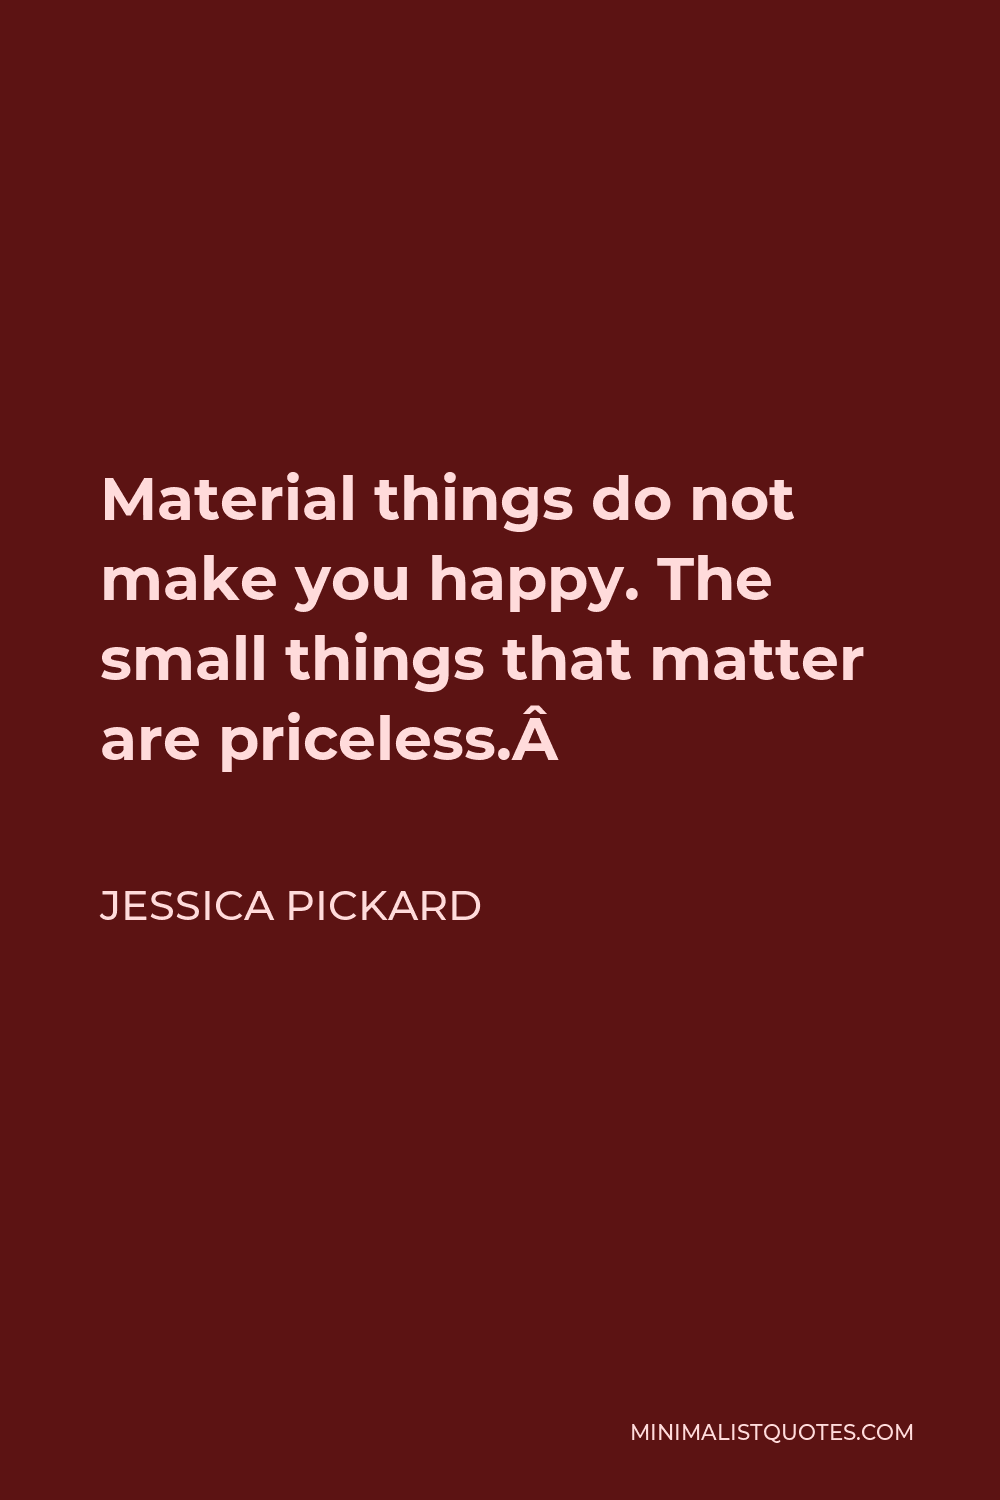 Jessica Pickard Quote - Material things do not make you happy. The small things that matter are priceless. 